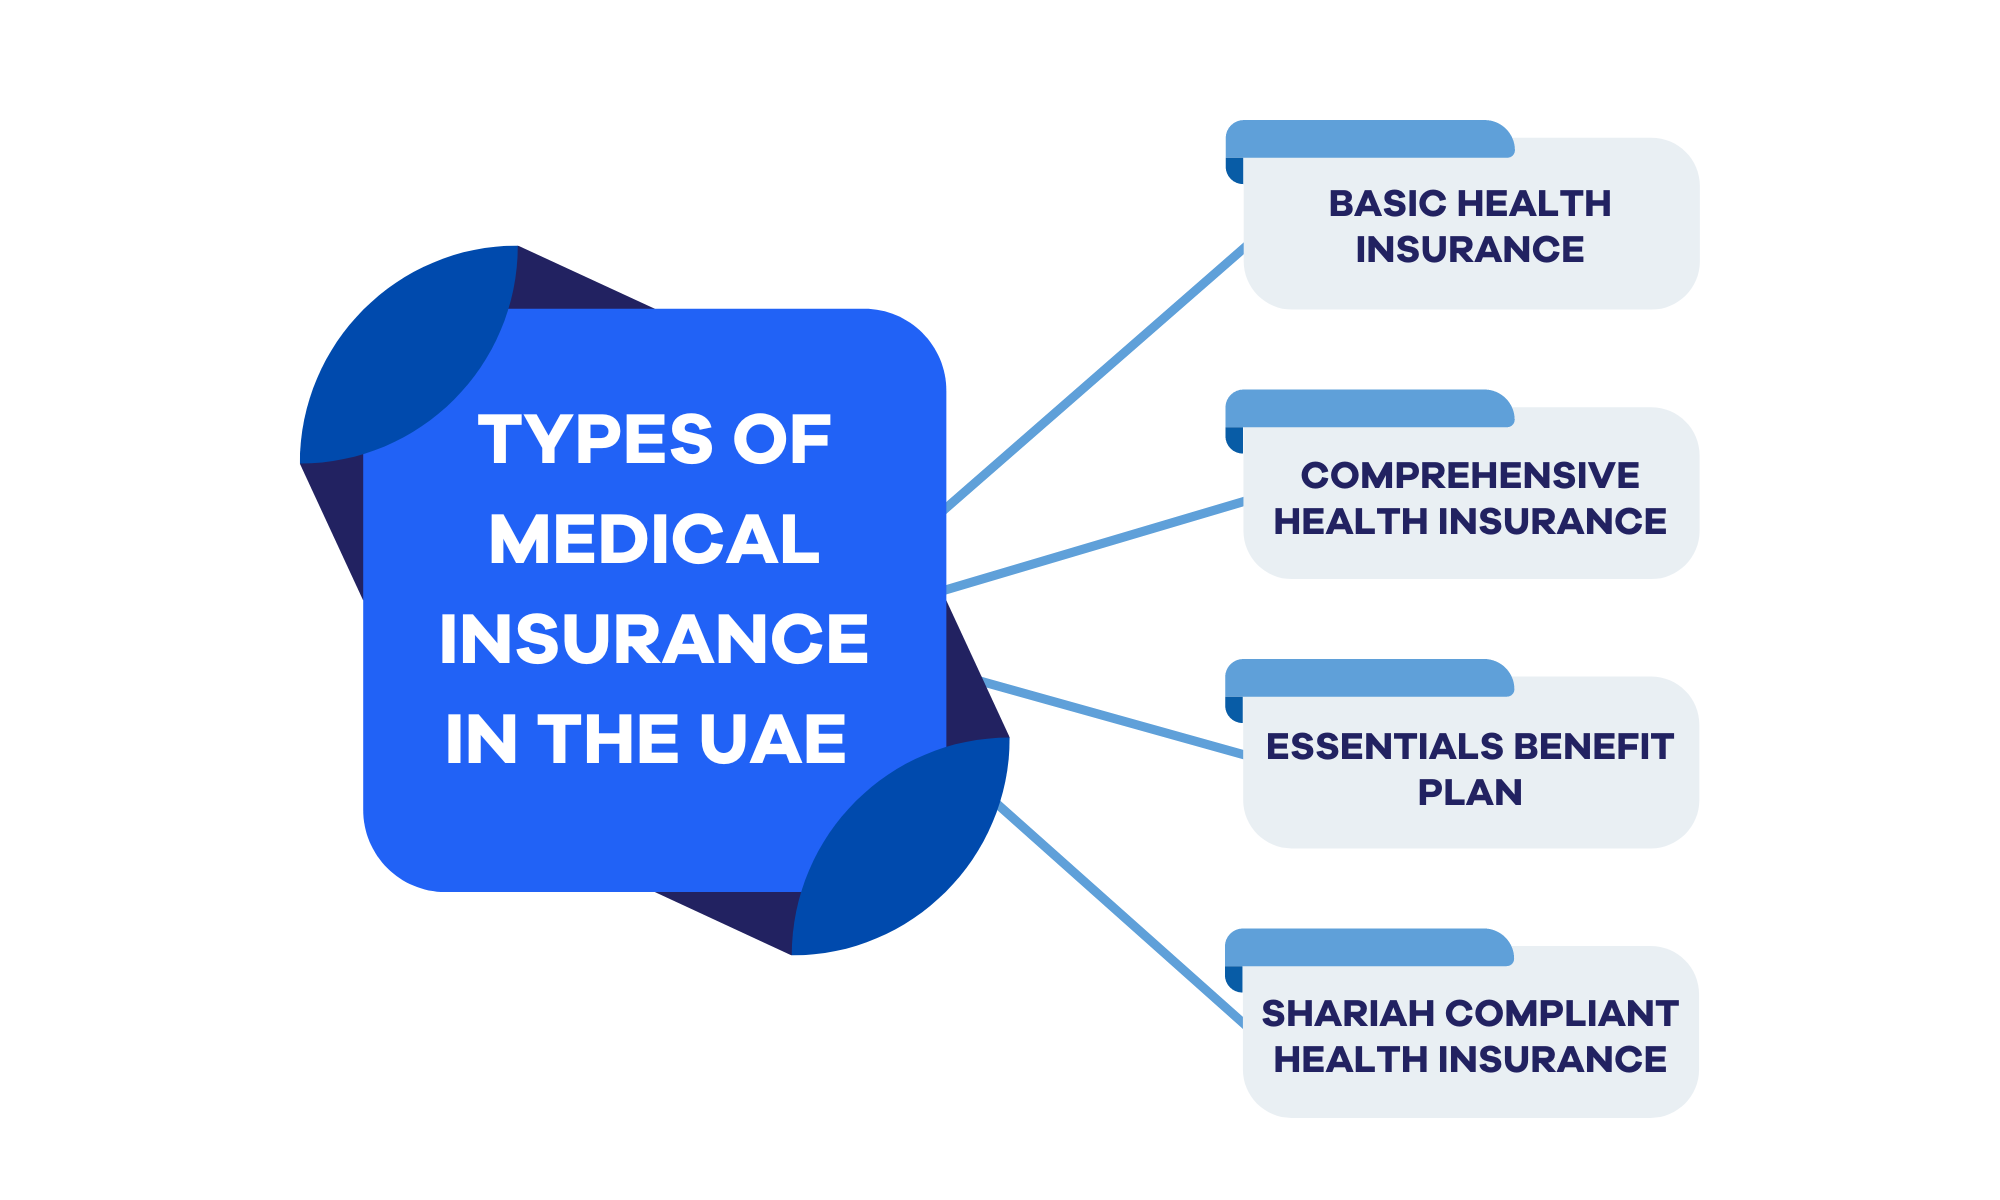 medical-insurance-cost-compare-buy-health-insurance-plans-in-uae